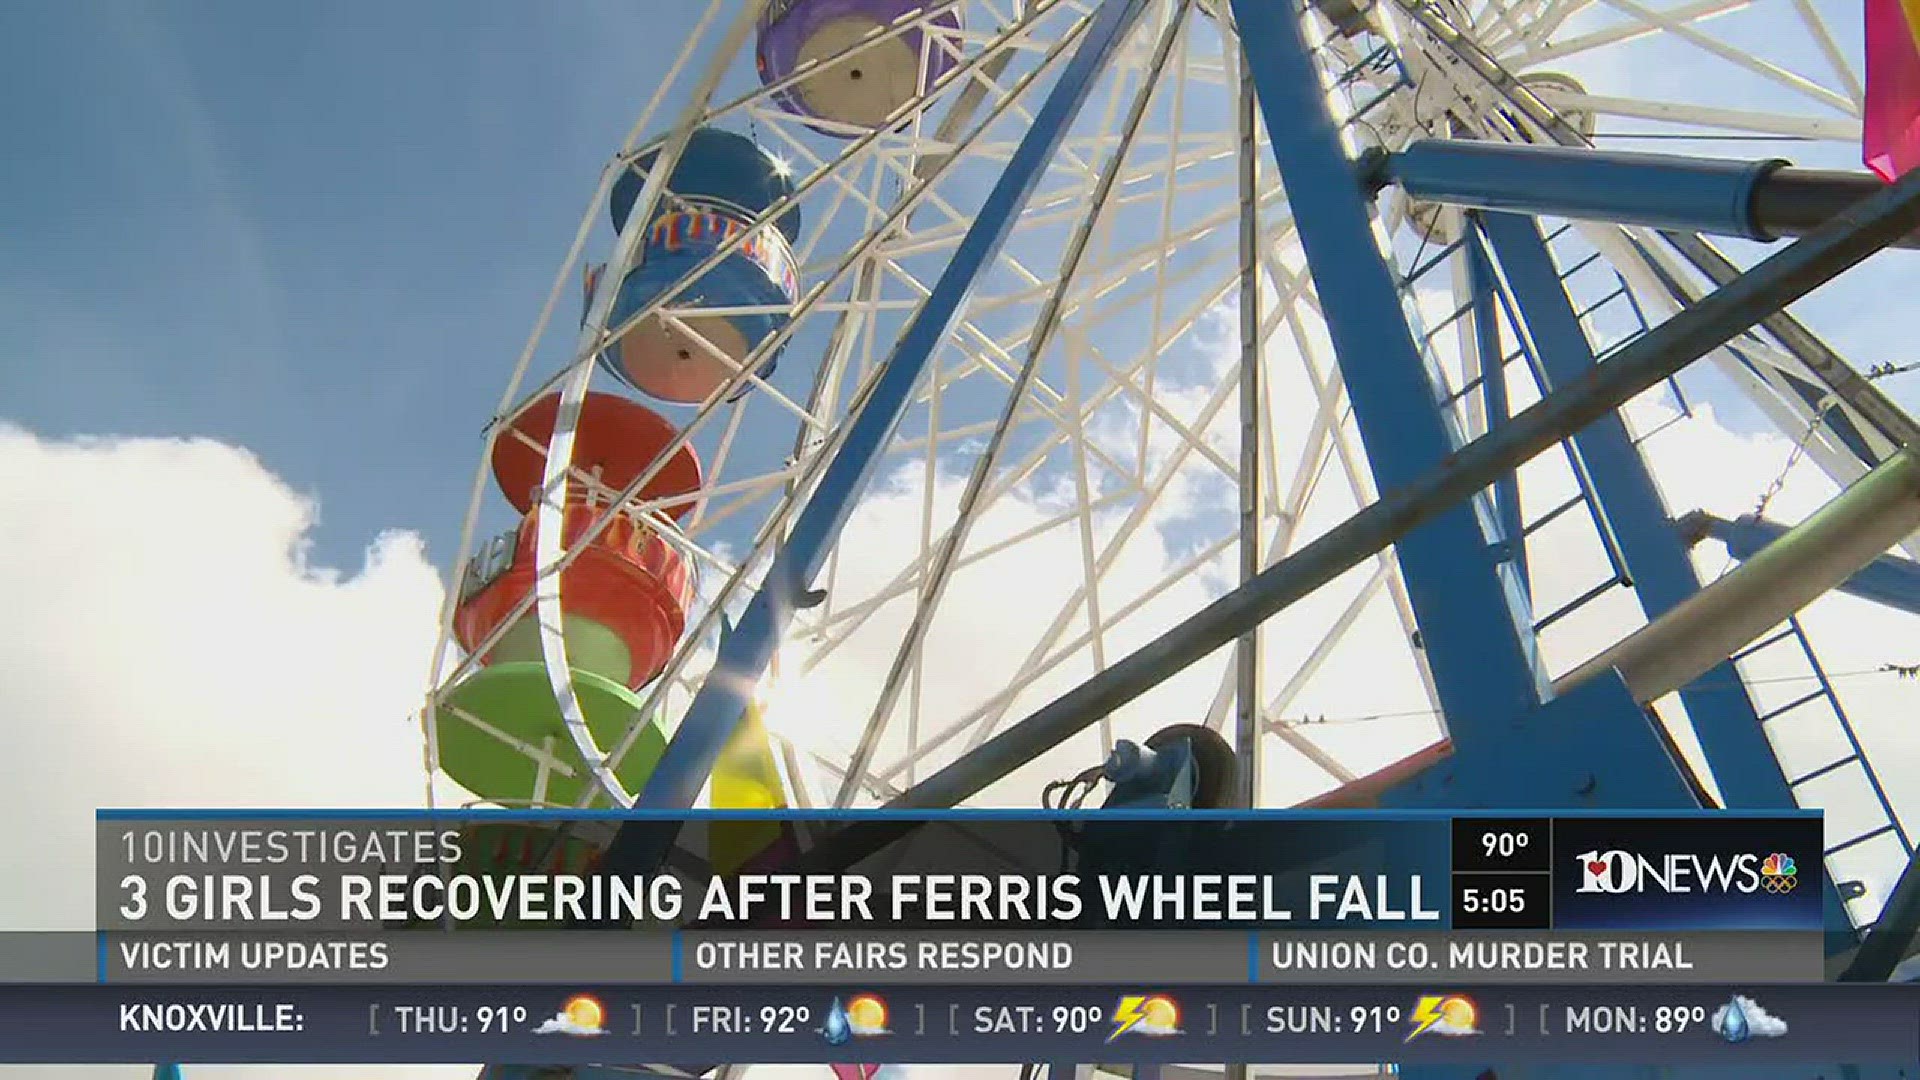 10 Investigates further examines the ride operators involved in the Greene County Fair Ferris wheel accident that put 3 girls in the hospital. August 10, 2016.